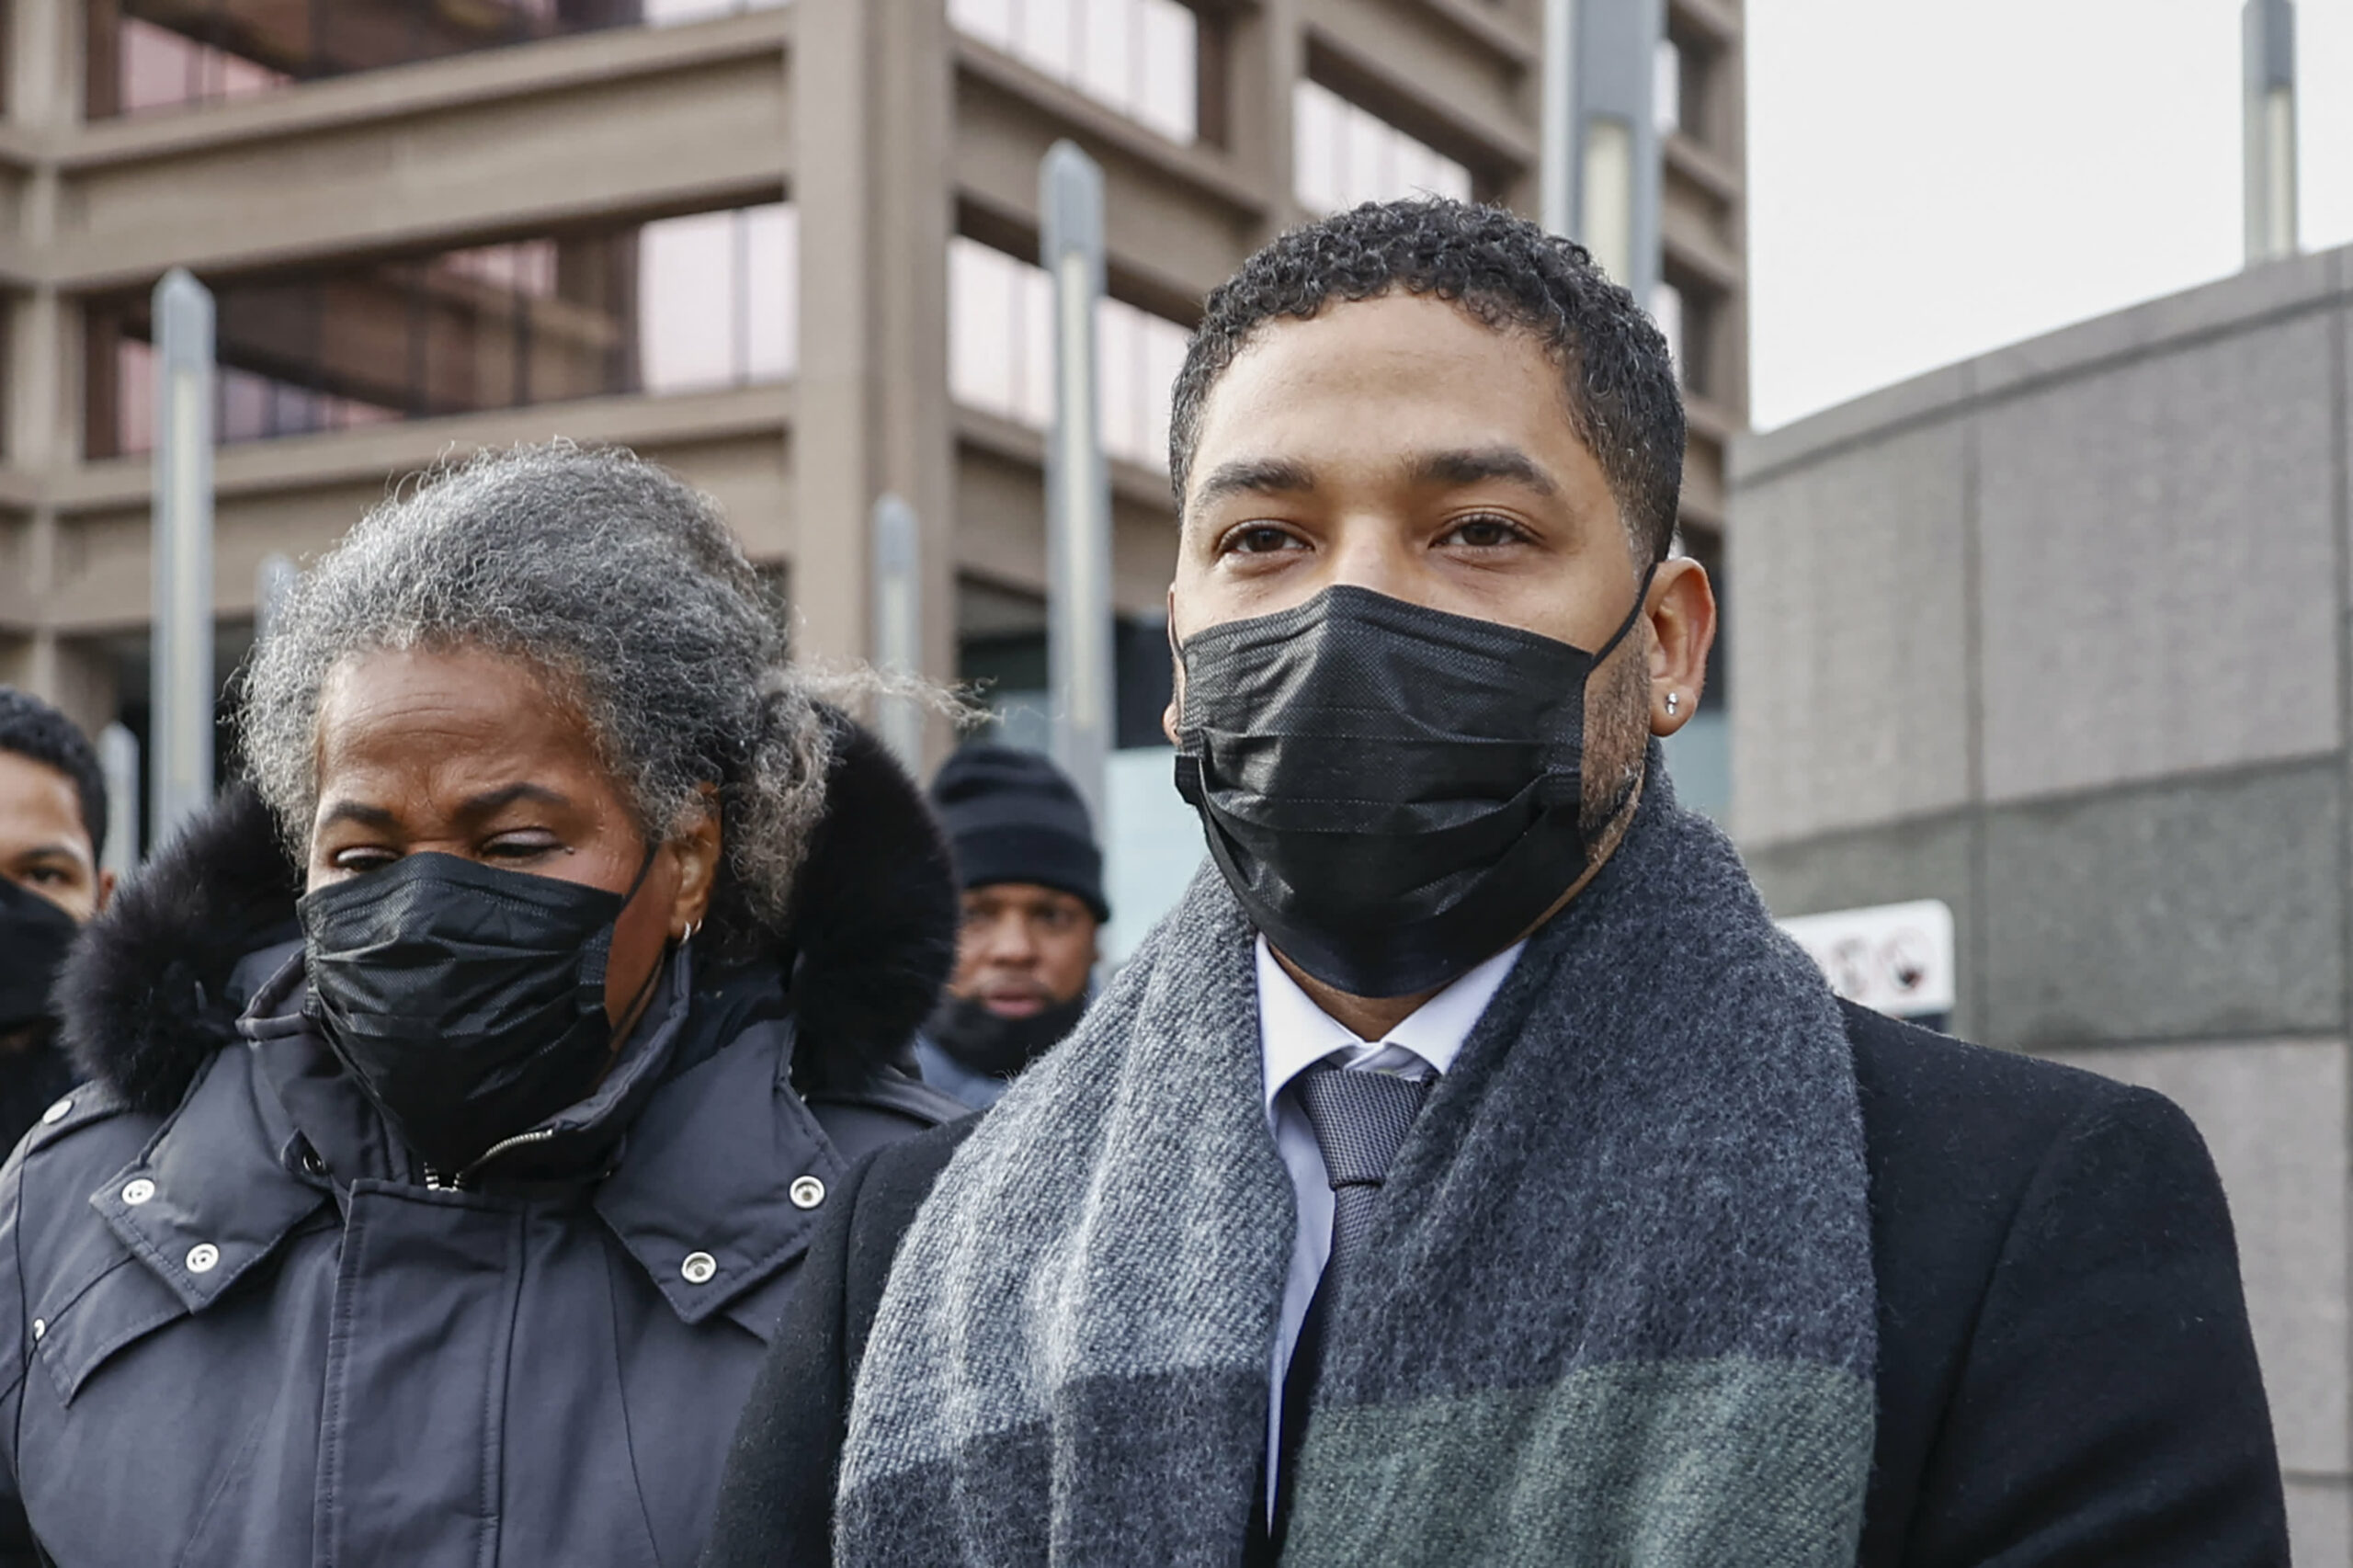 Jussie Smollett found guilty of faking hate crime, lying to police